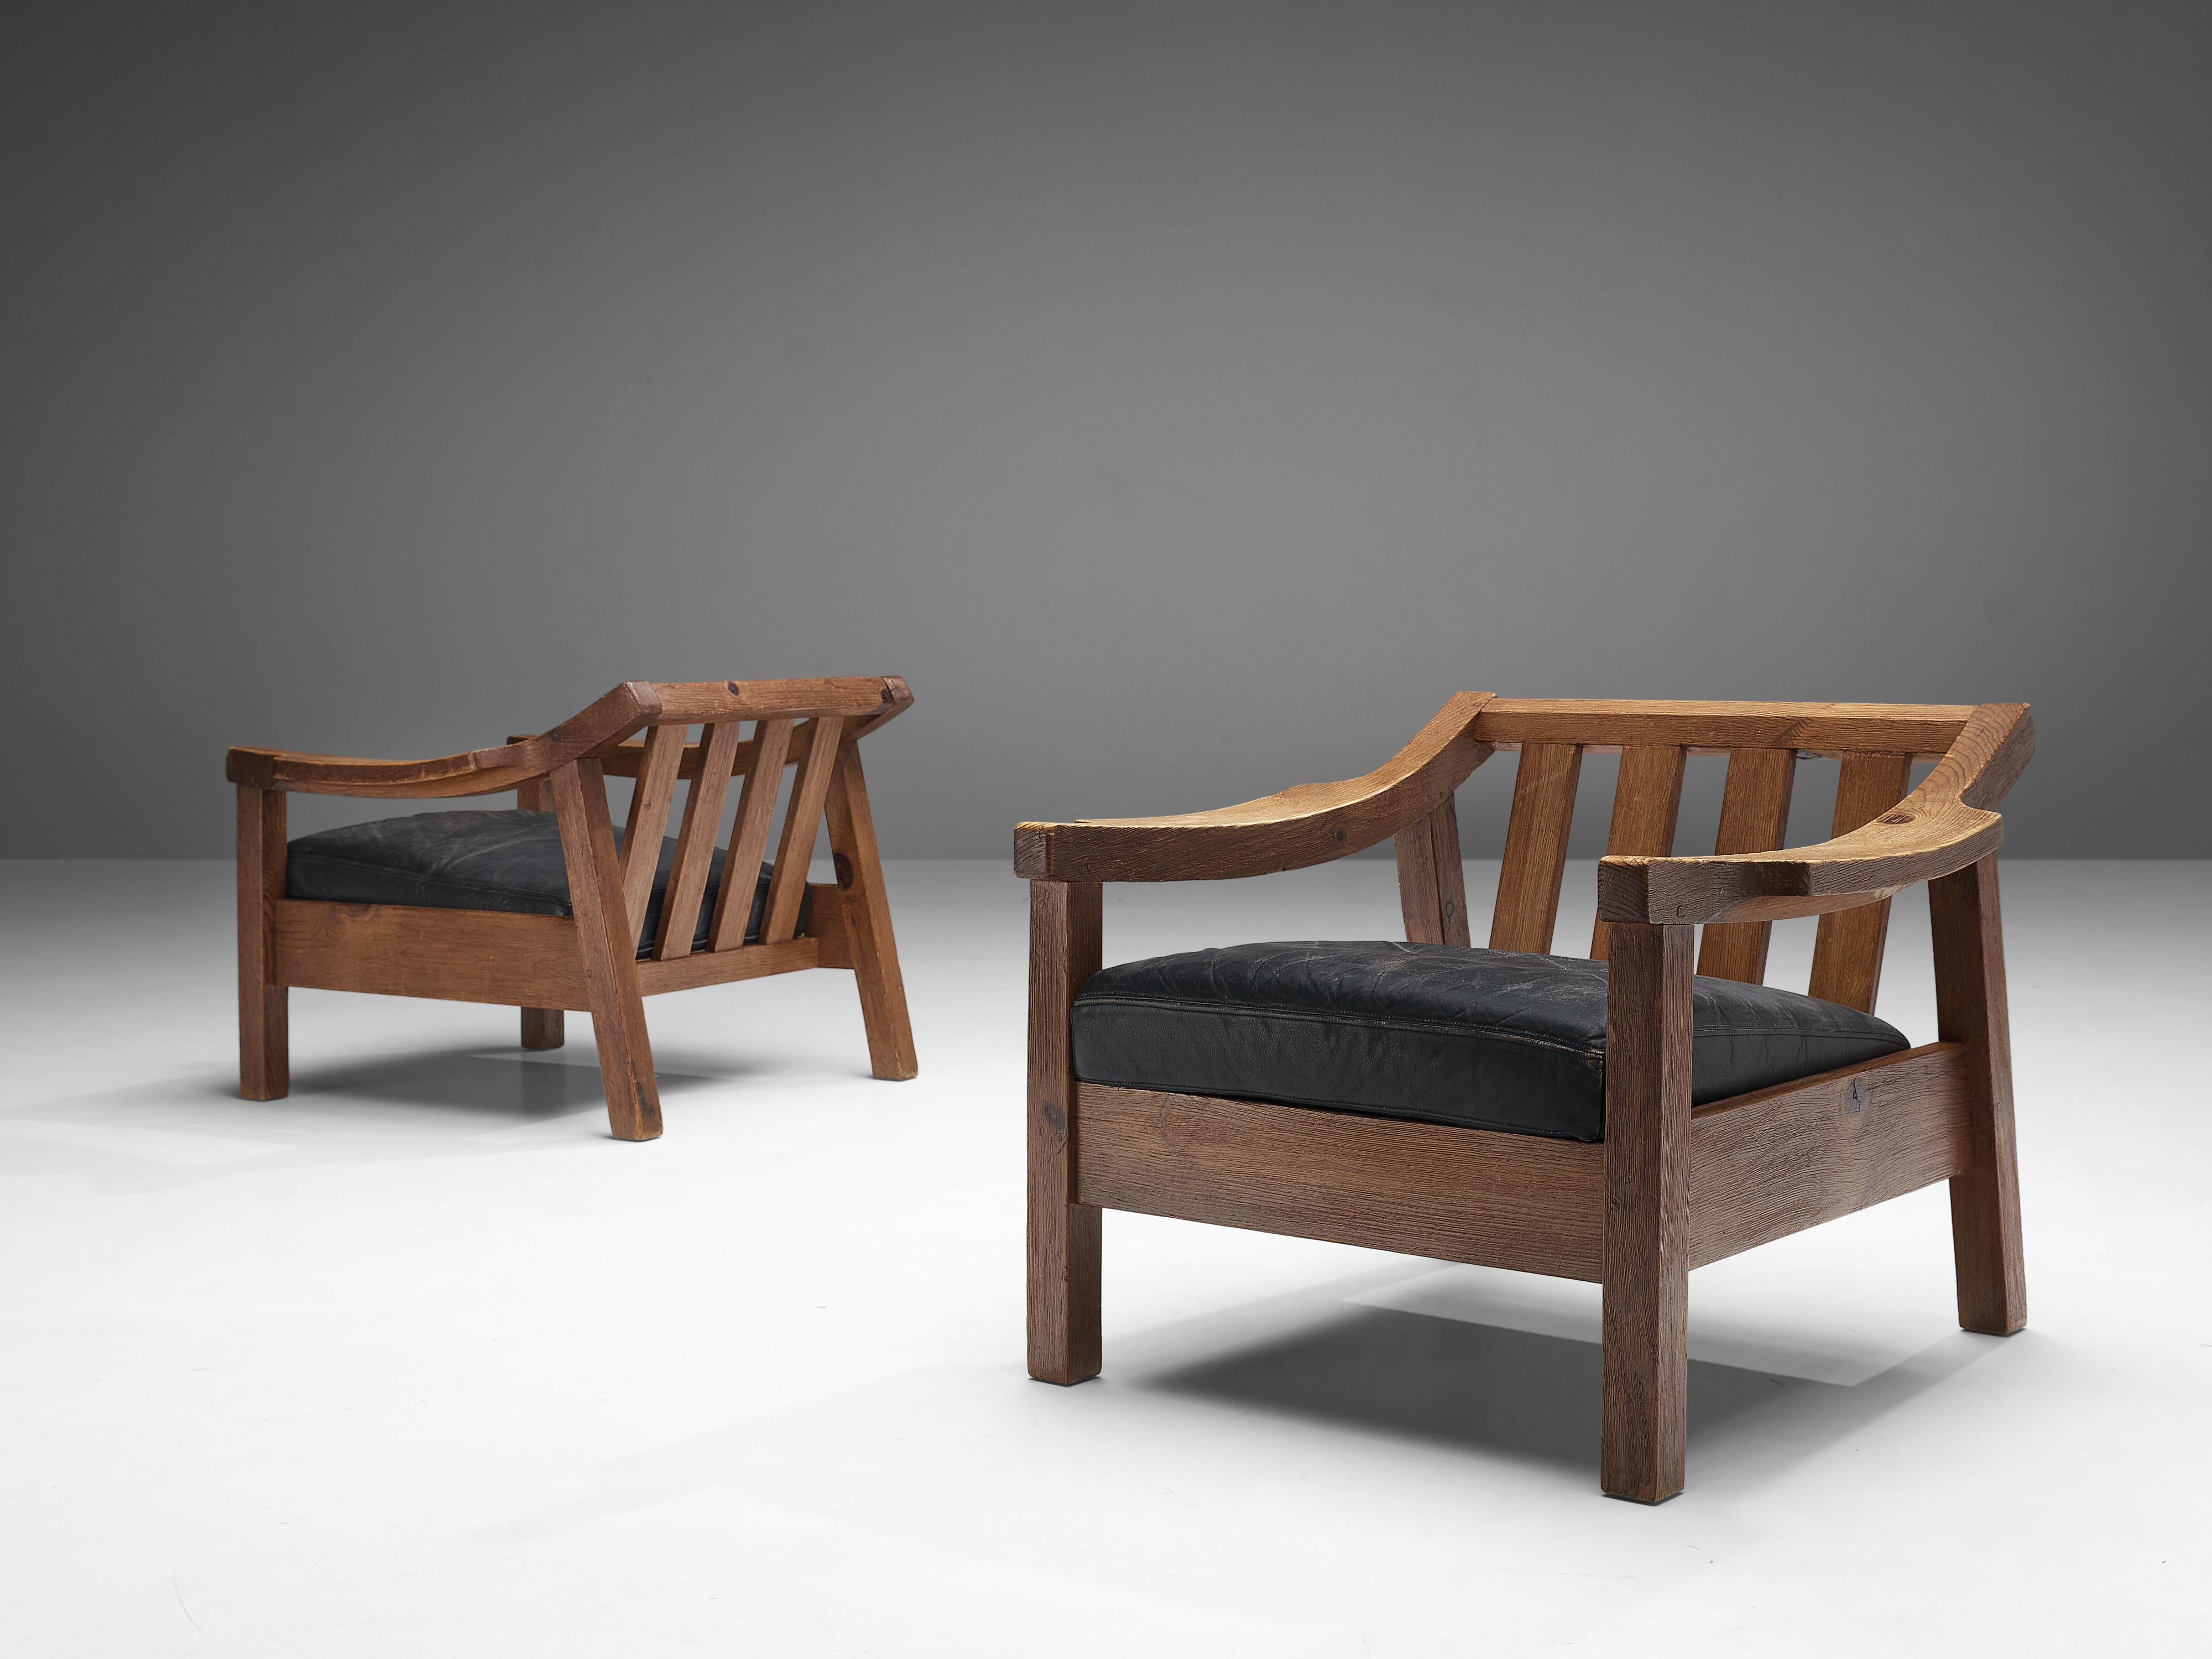 Brutalist lounge chairs, oak, Spain, 1960s

Pair of lounge chairs with sturdy frames in oak. The backrest has angled, straight slats whereas the armrests have a curved and more organic appeal. A thick seat cushion provides seating comfort.